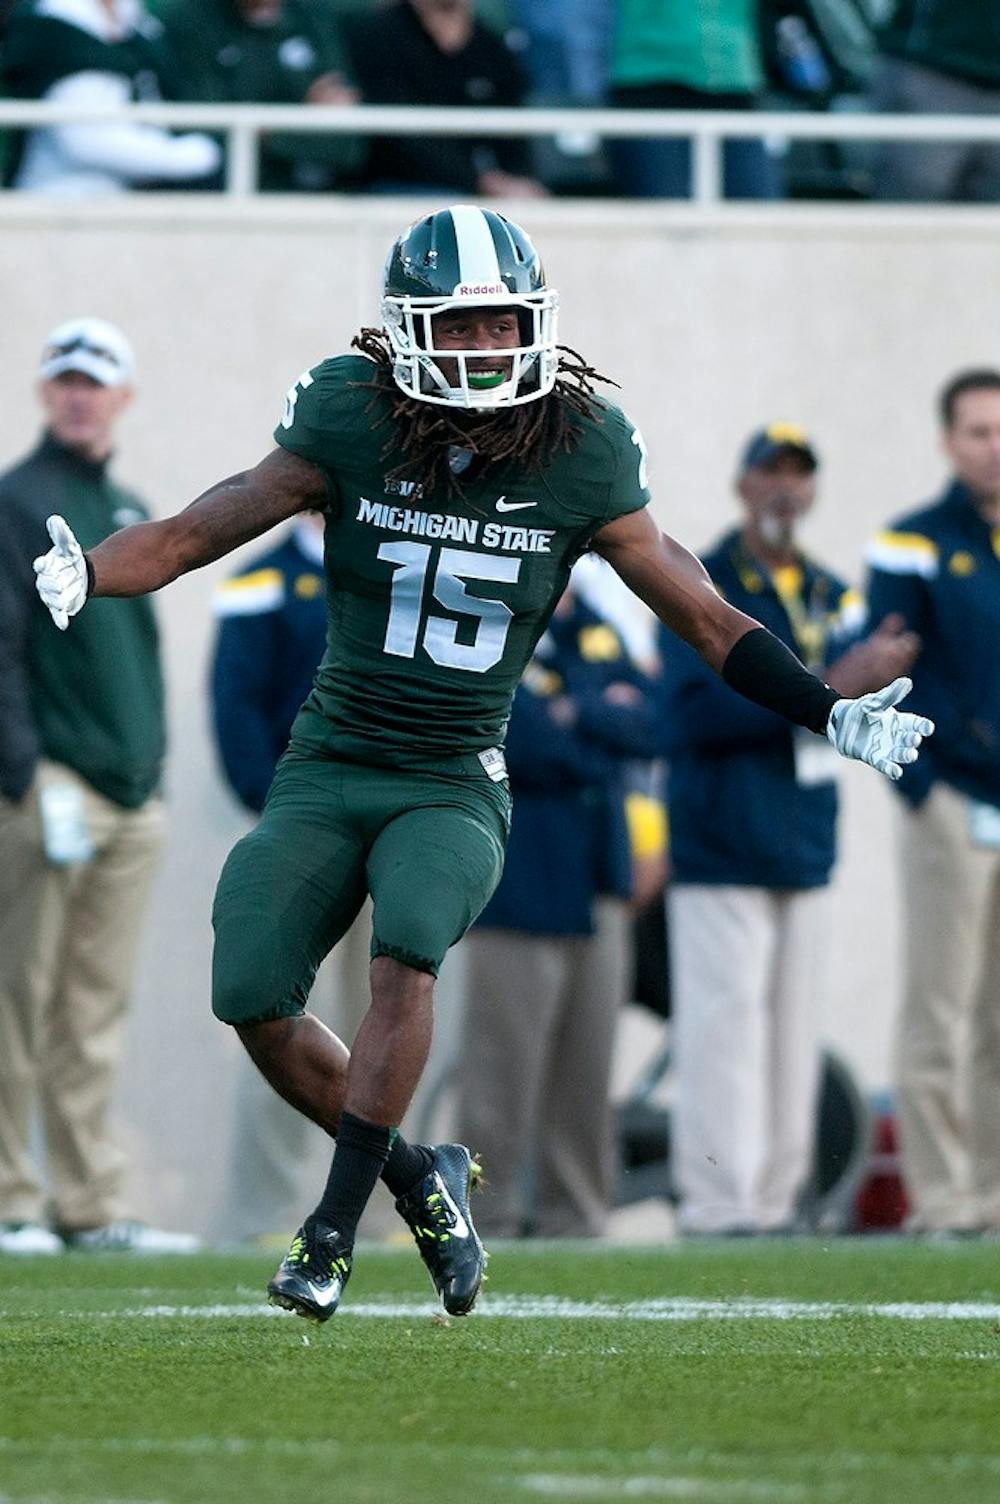 <p>Junior cornerback Trae Waynes reacts to a Michigan incomplete pass during the game against Michigan on Oct. 25, 2014, at Spartan Stadium. The Spartans defeated the Wolverines, 35-11. Jessalyn Tamez/The State News </p>